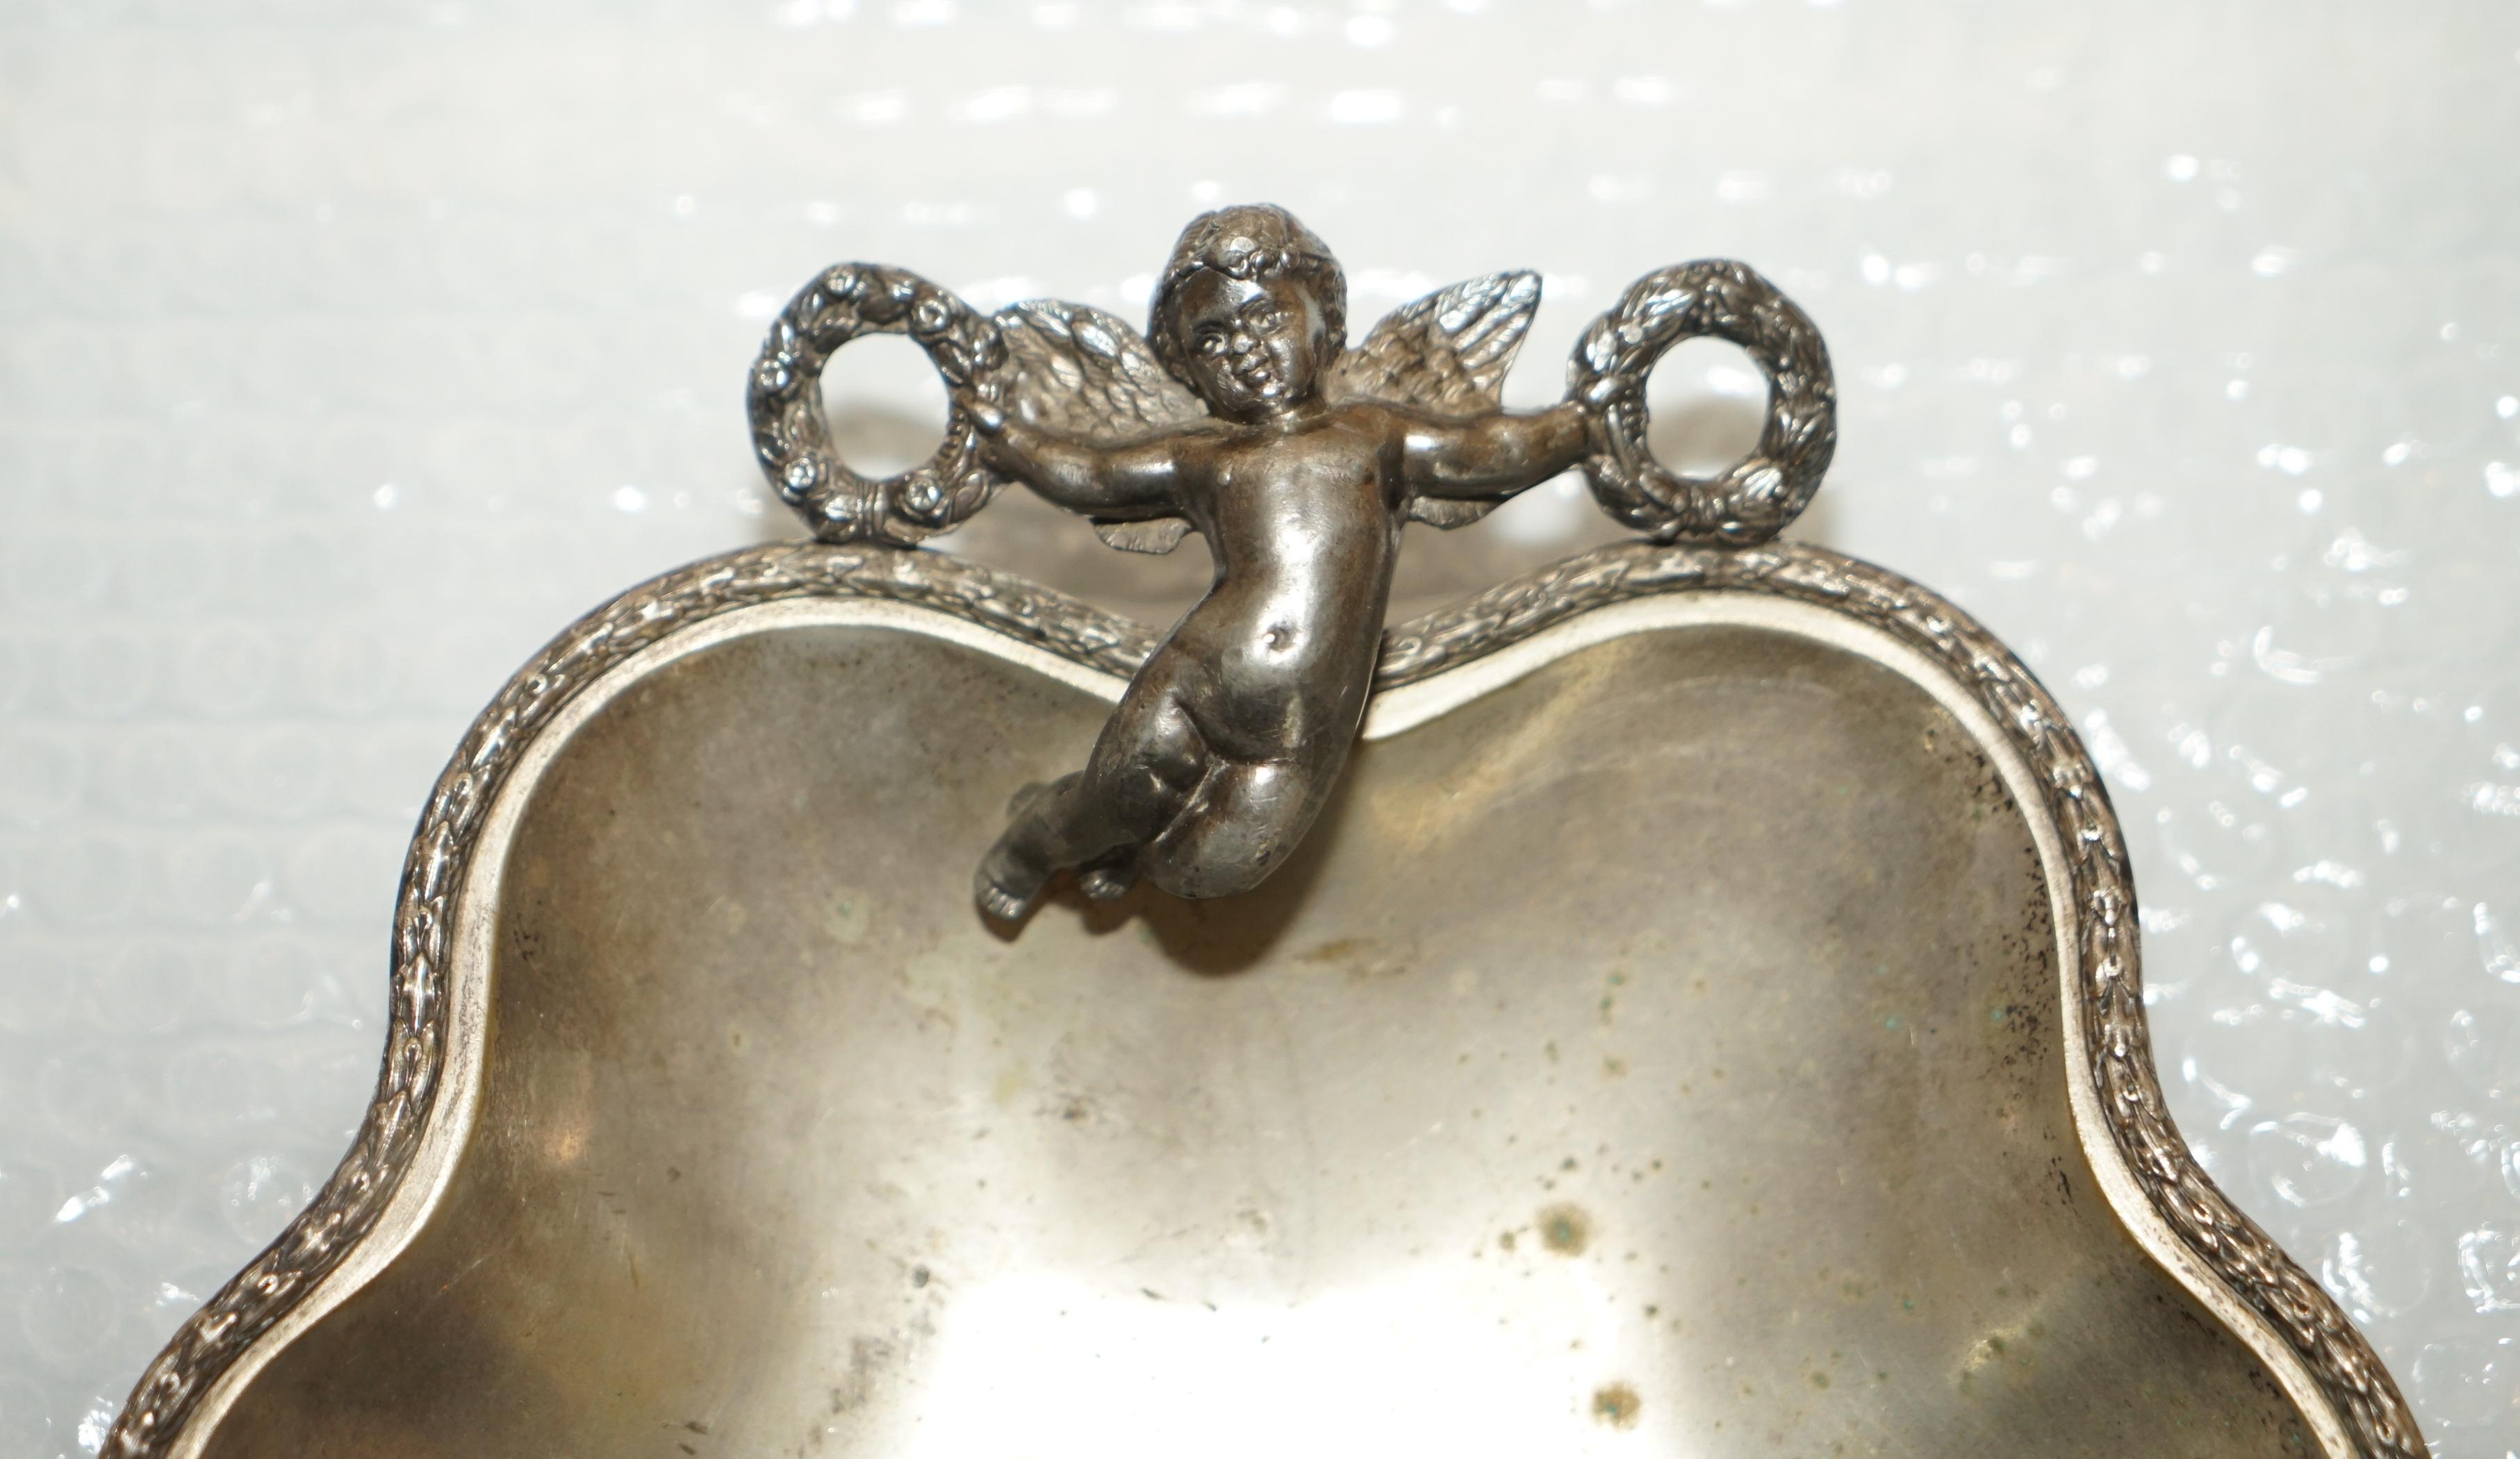 Lovely Antique Original Worn Finish Silver Plated Cherub Handle Serving Tray For Sale 3